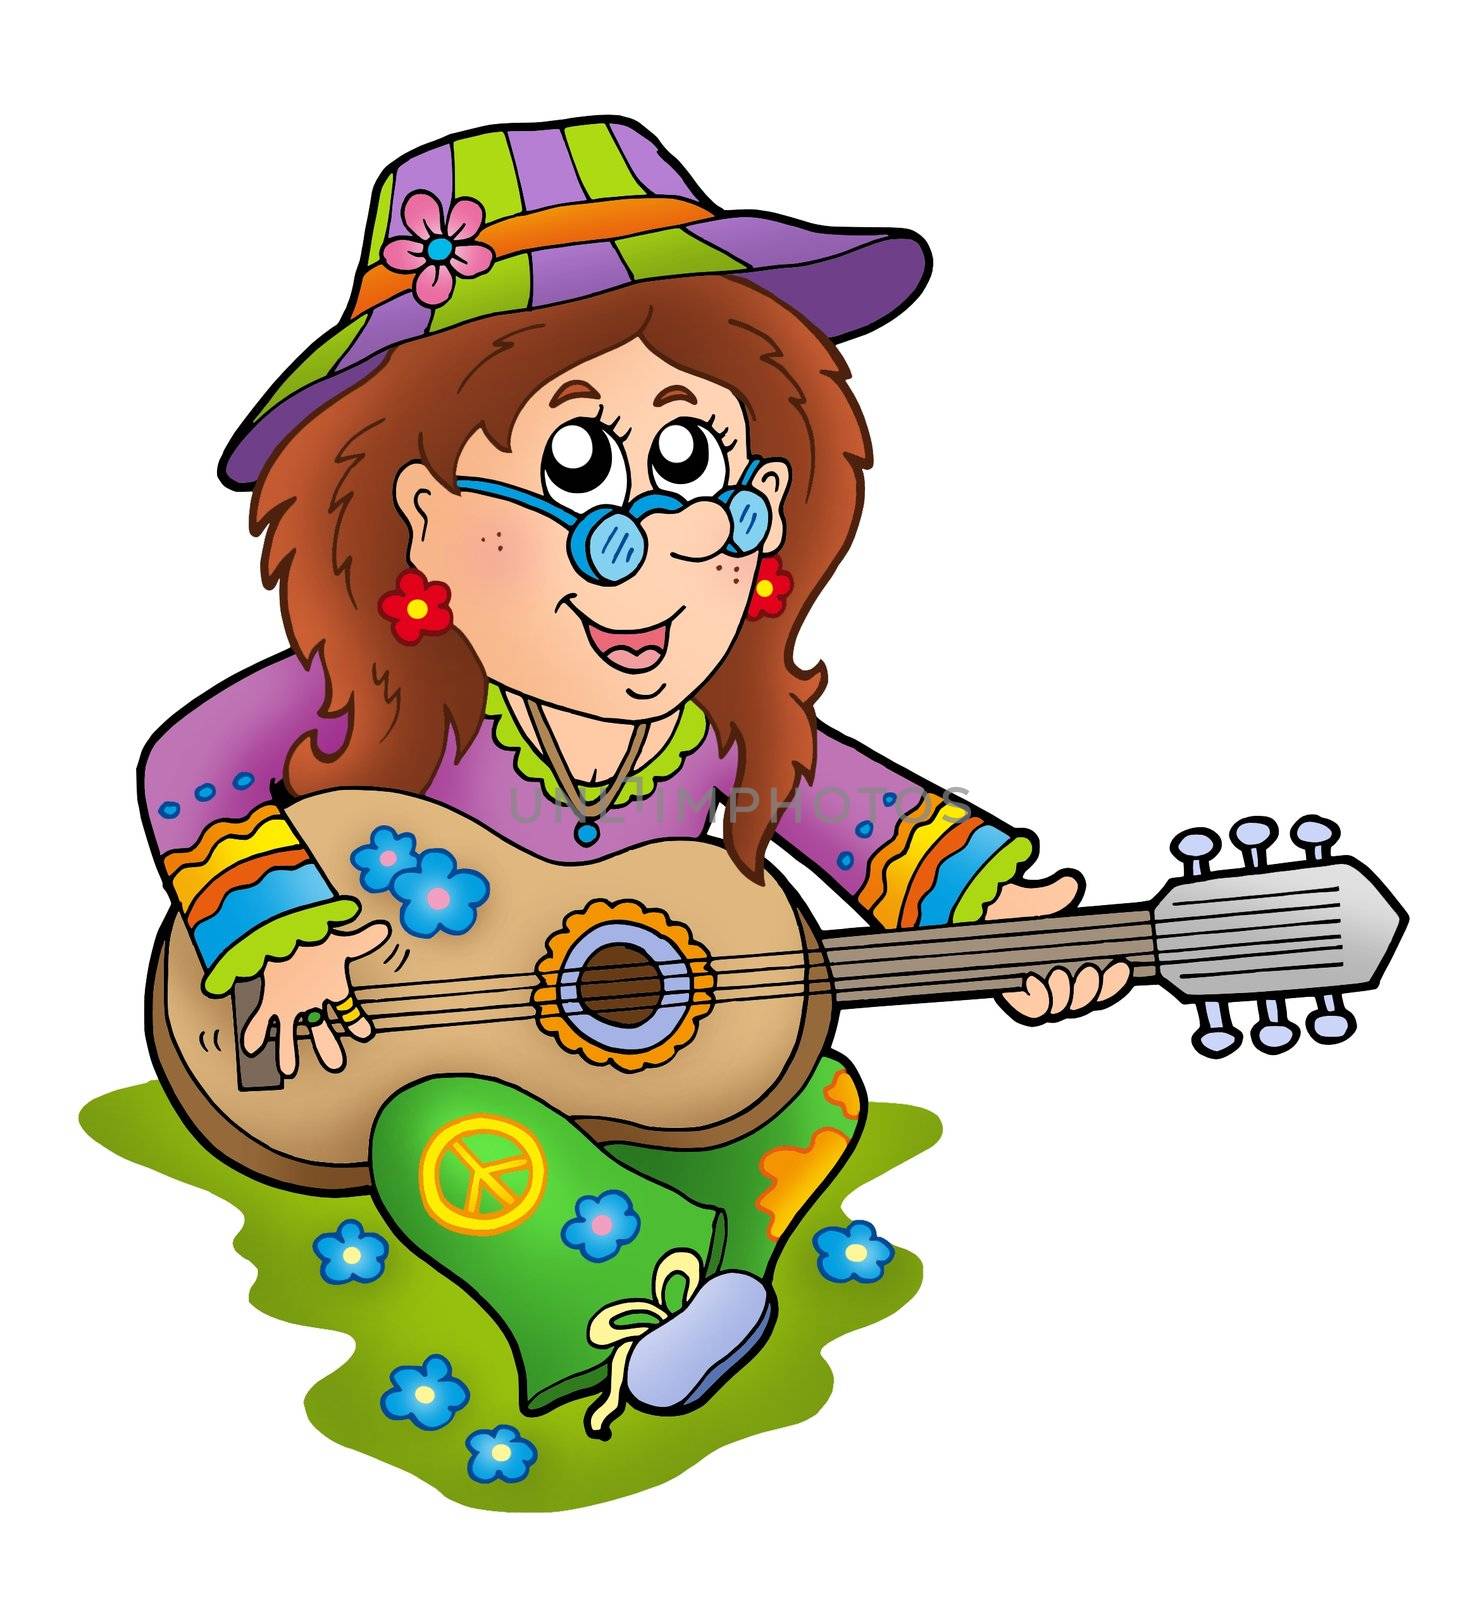 Hippie guitar player outdoor - color illustration.